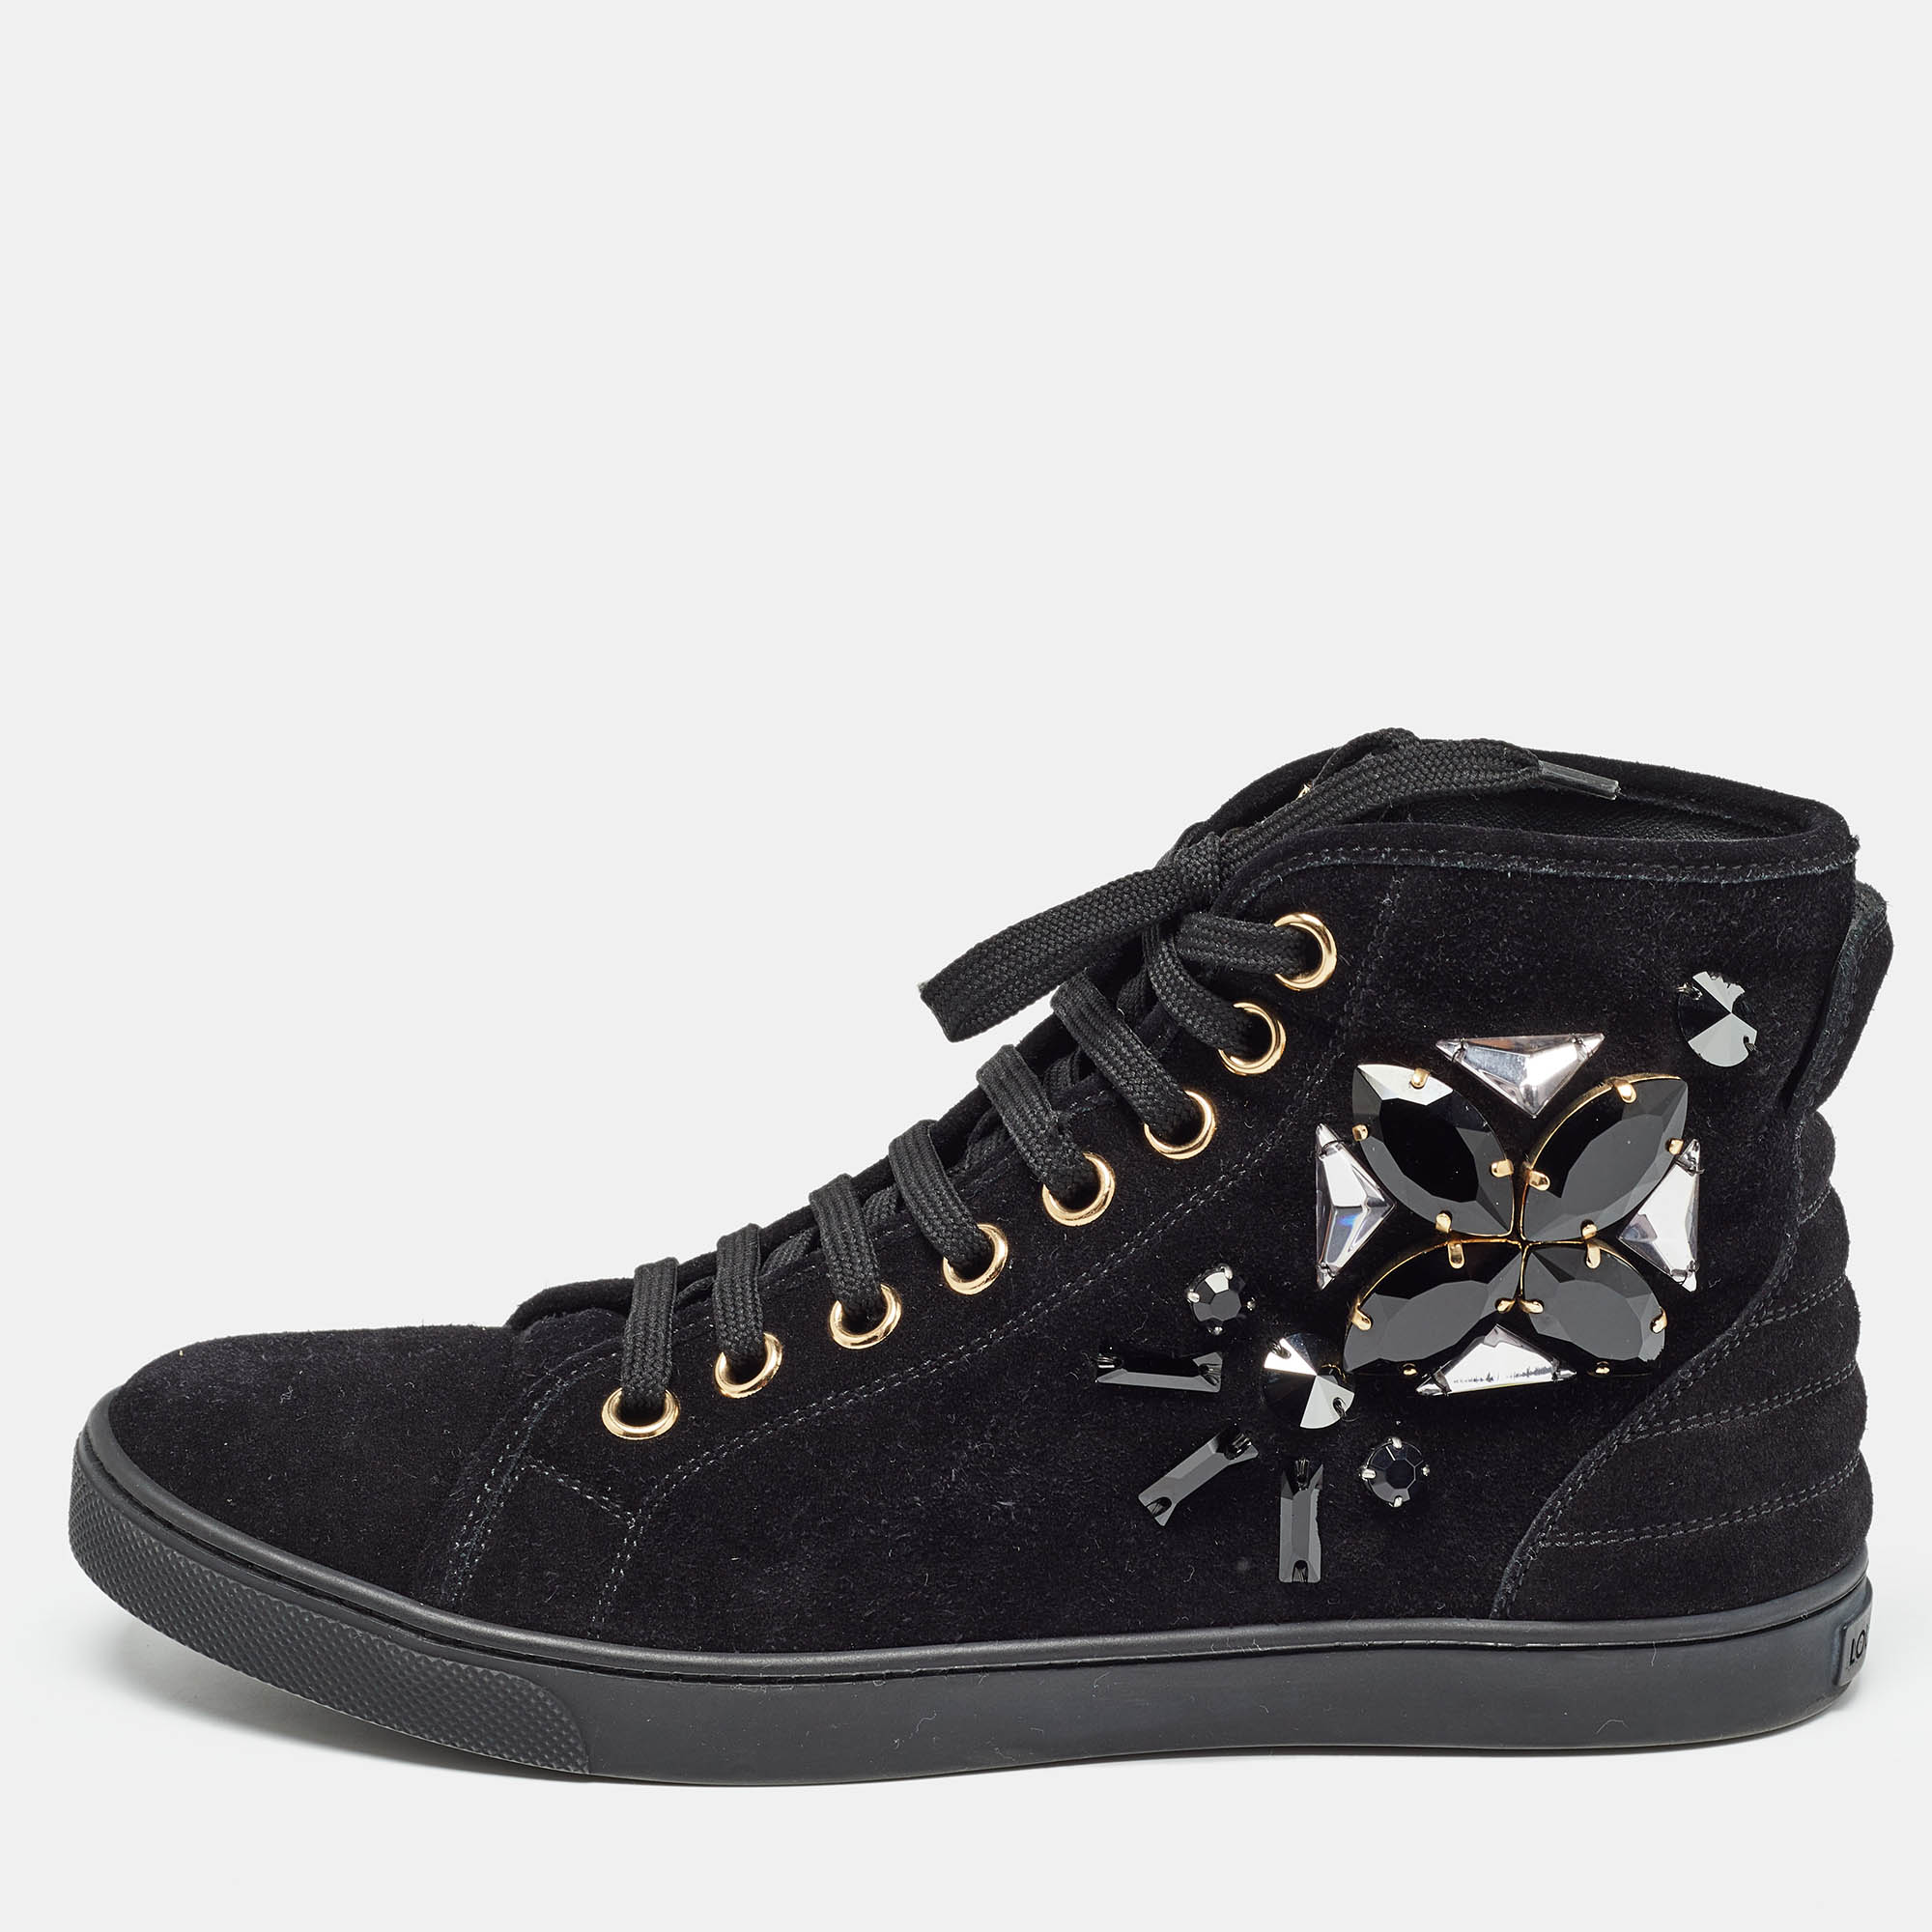 Louis vuitton black suede crystal embellished high top sneakers size 38